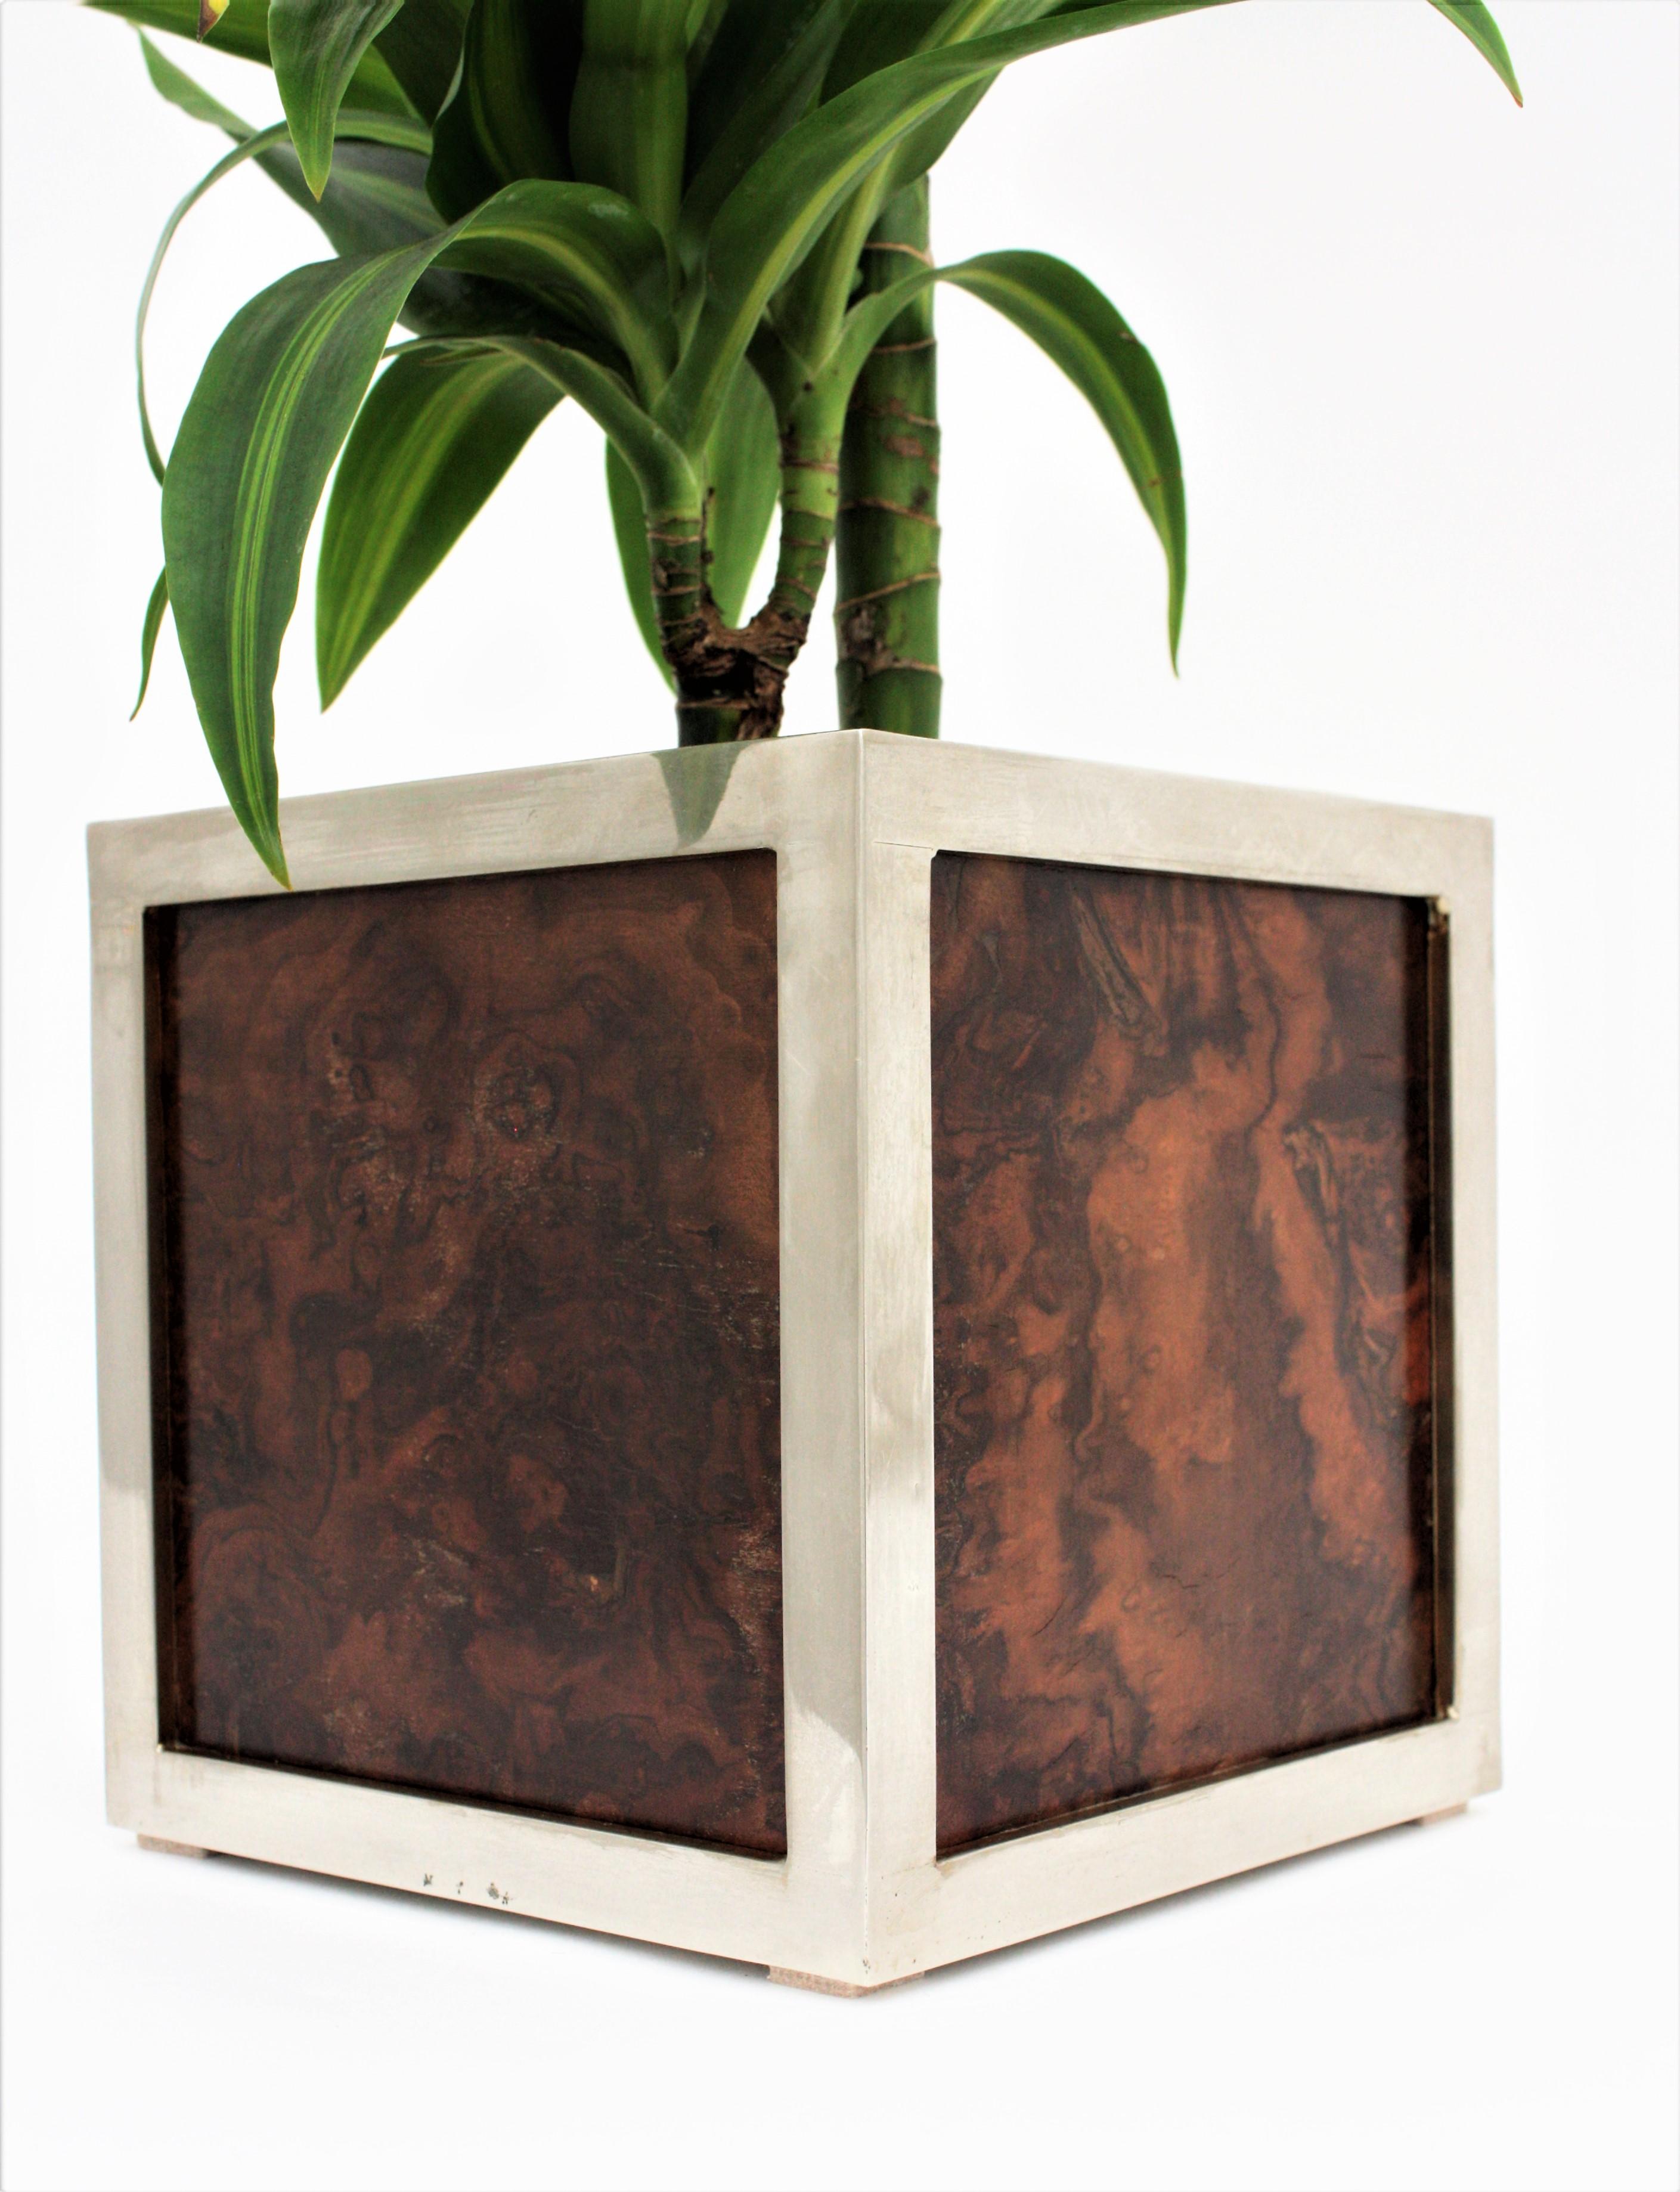 20th Century Maison Lancel Inspired Planter in Walnut and Chromed Steel, 1970s For Sale